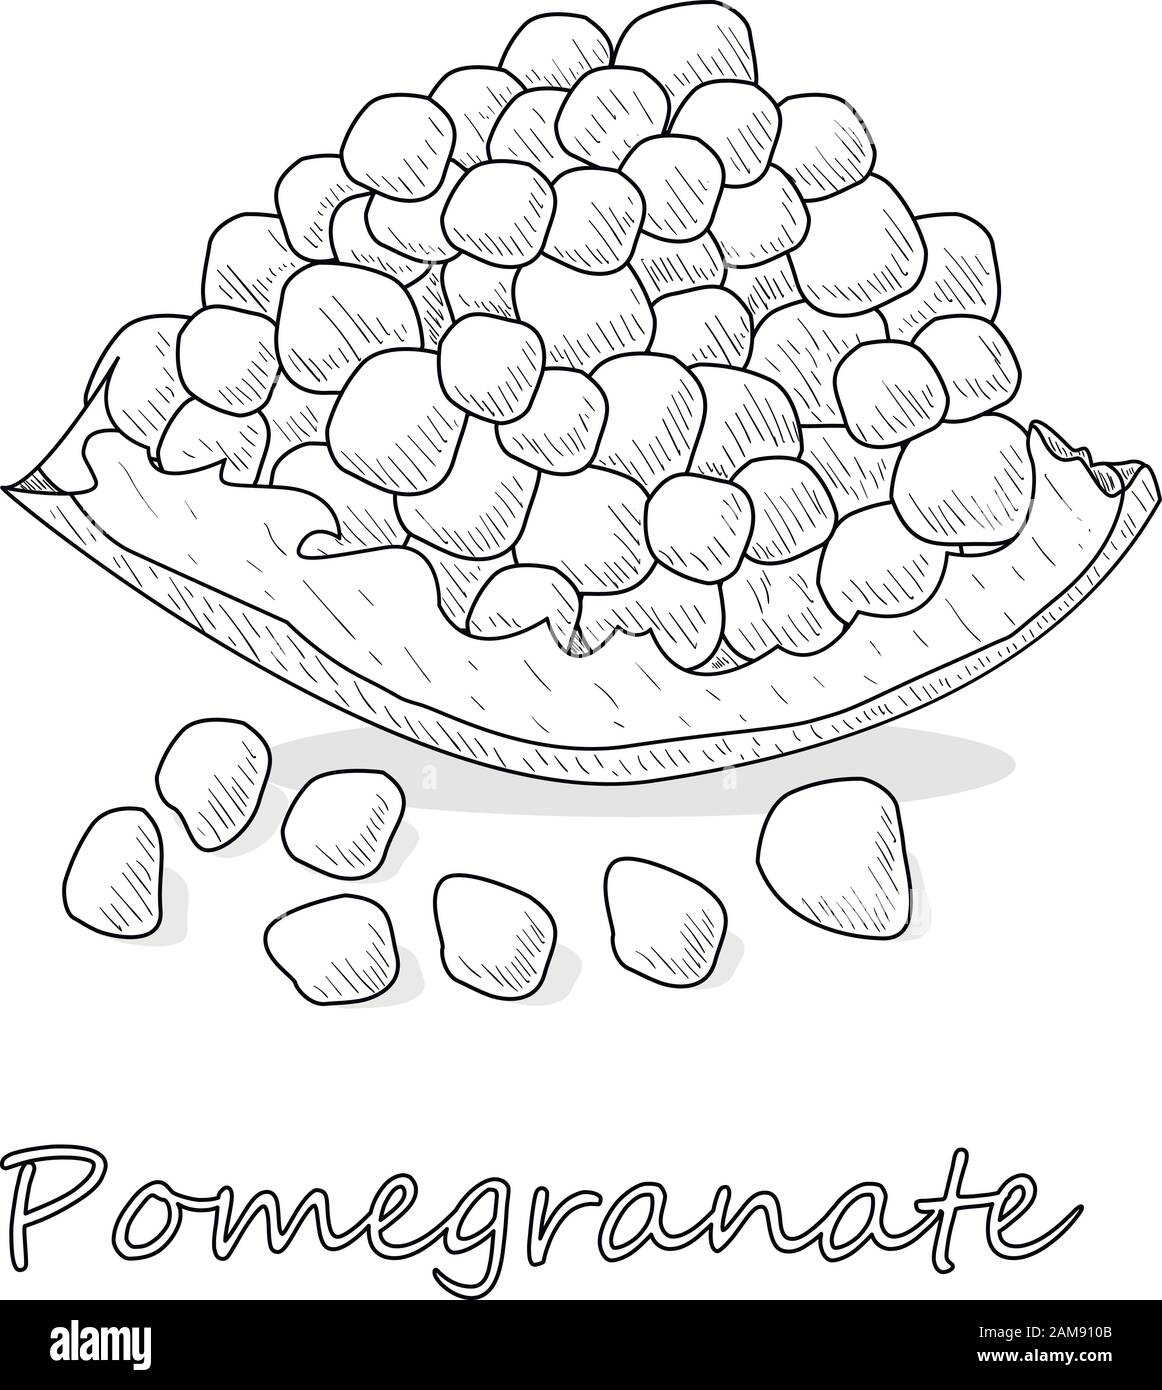 Pomegranate hand drown vector illustration isolated on white background. Monochrome. Stock Vector